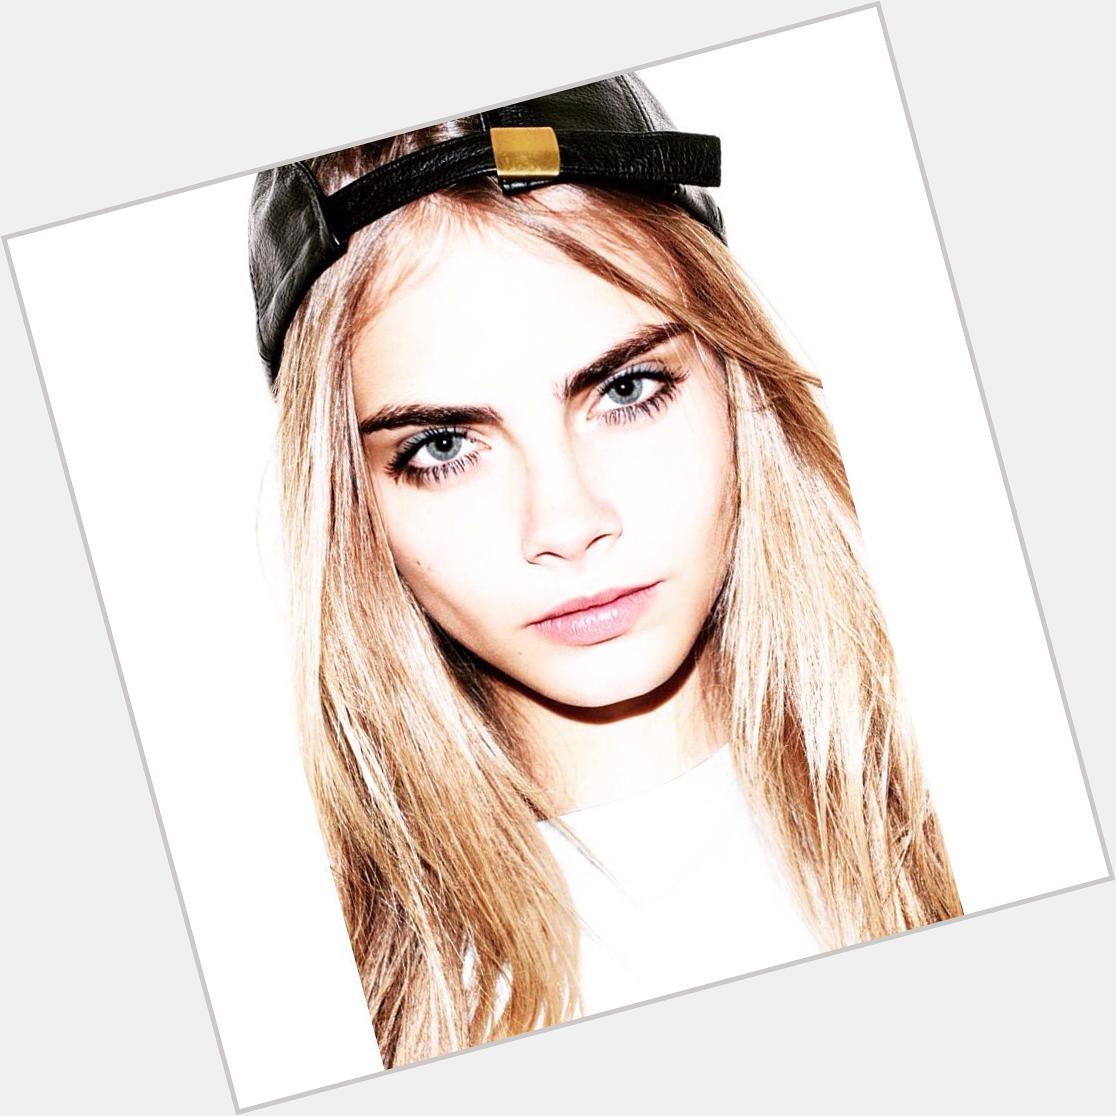 Happy 23rd birthday to Cara Delevingne! TRUTH Magazine wishes you all the best.  